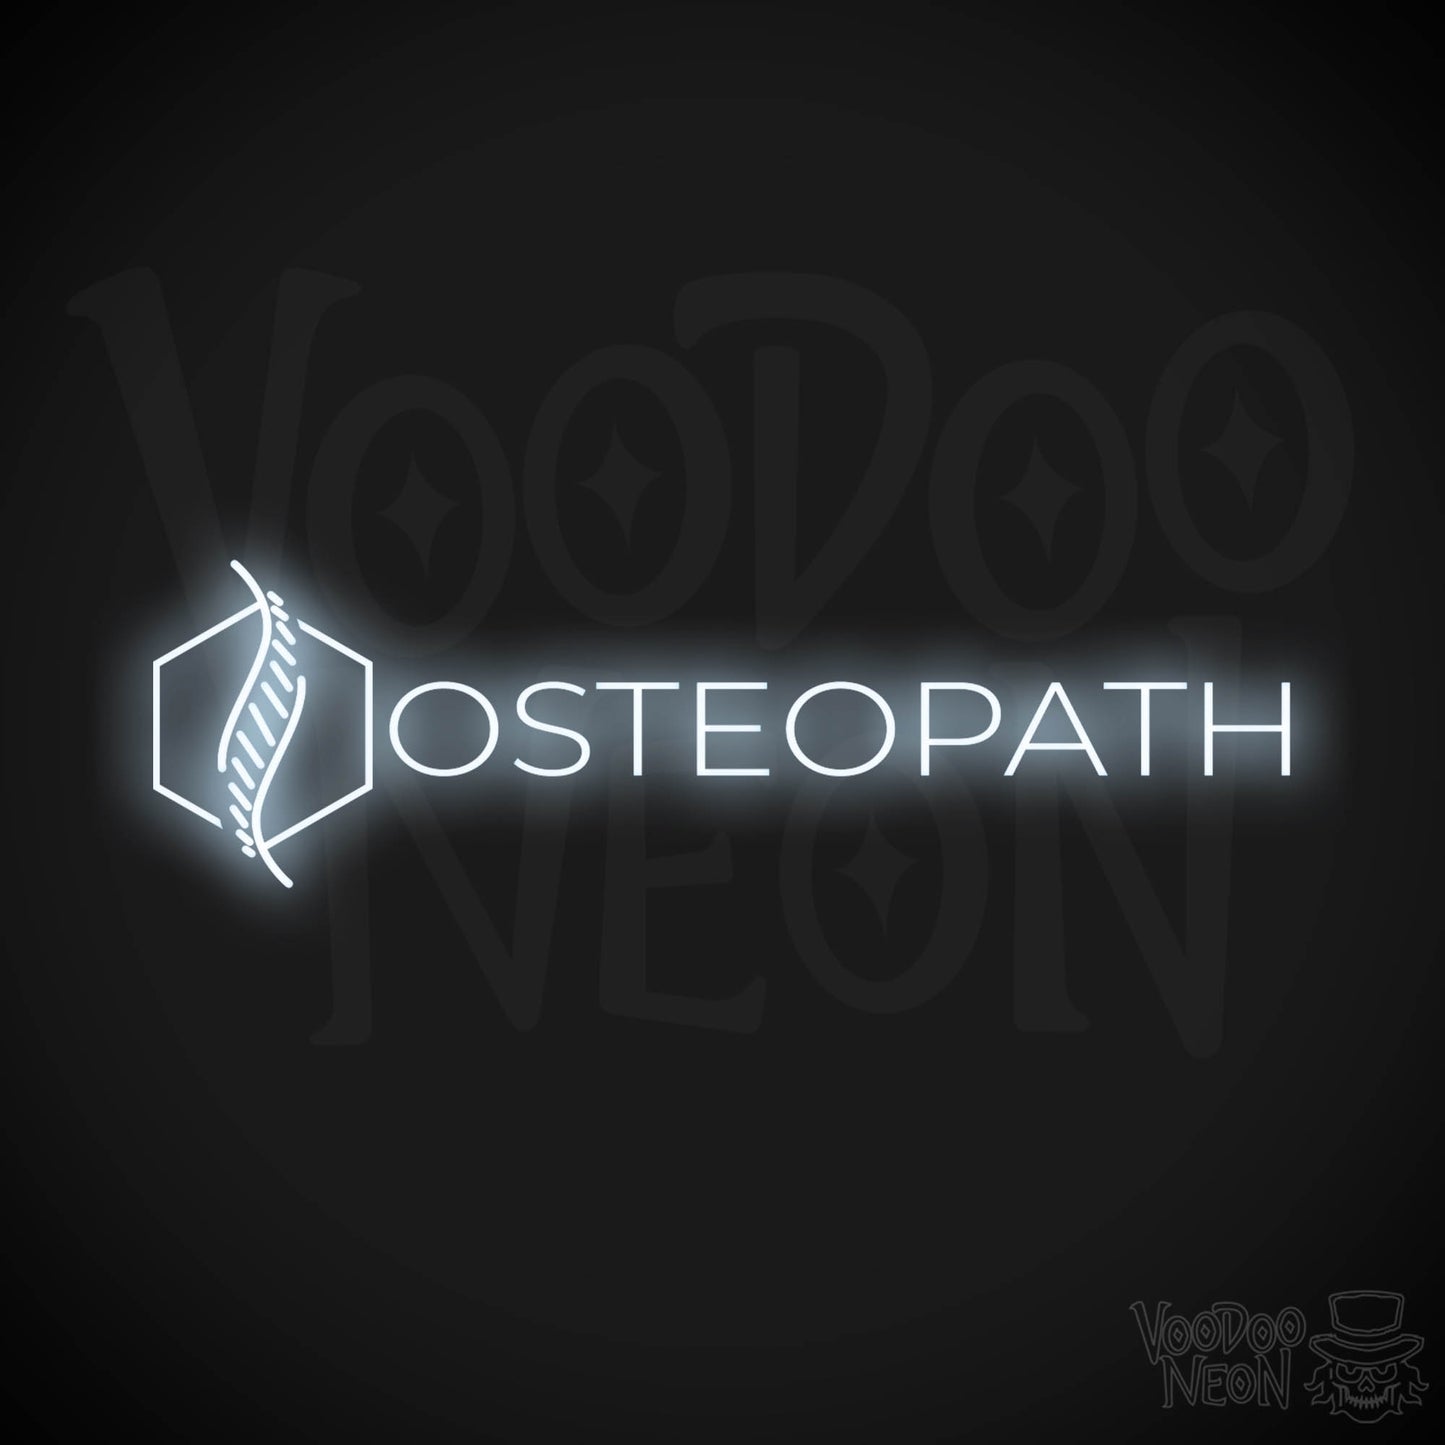 Osteopath LED Neon - Cool White